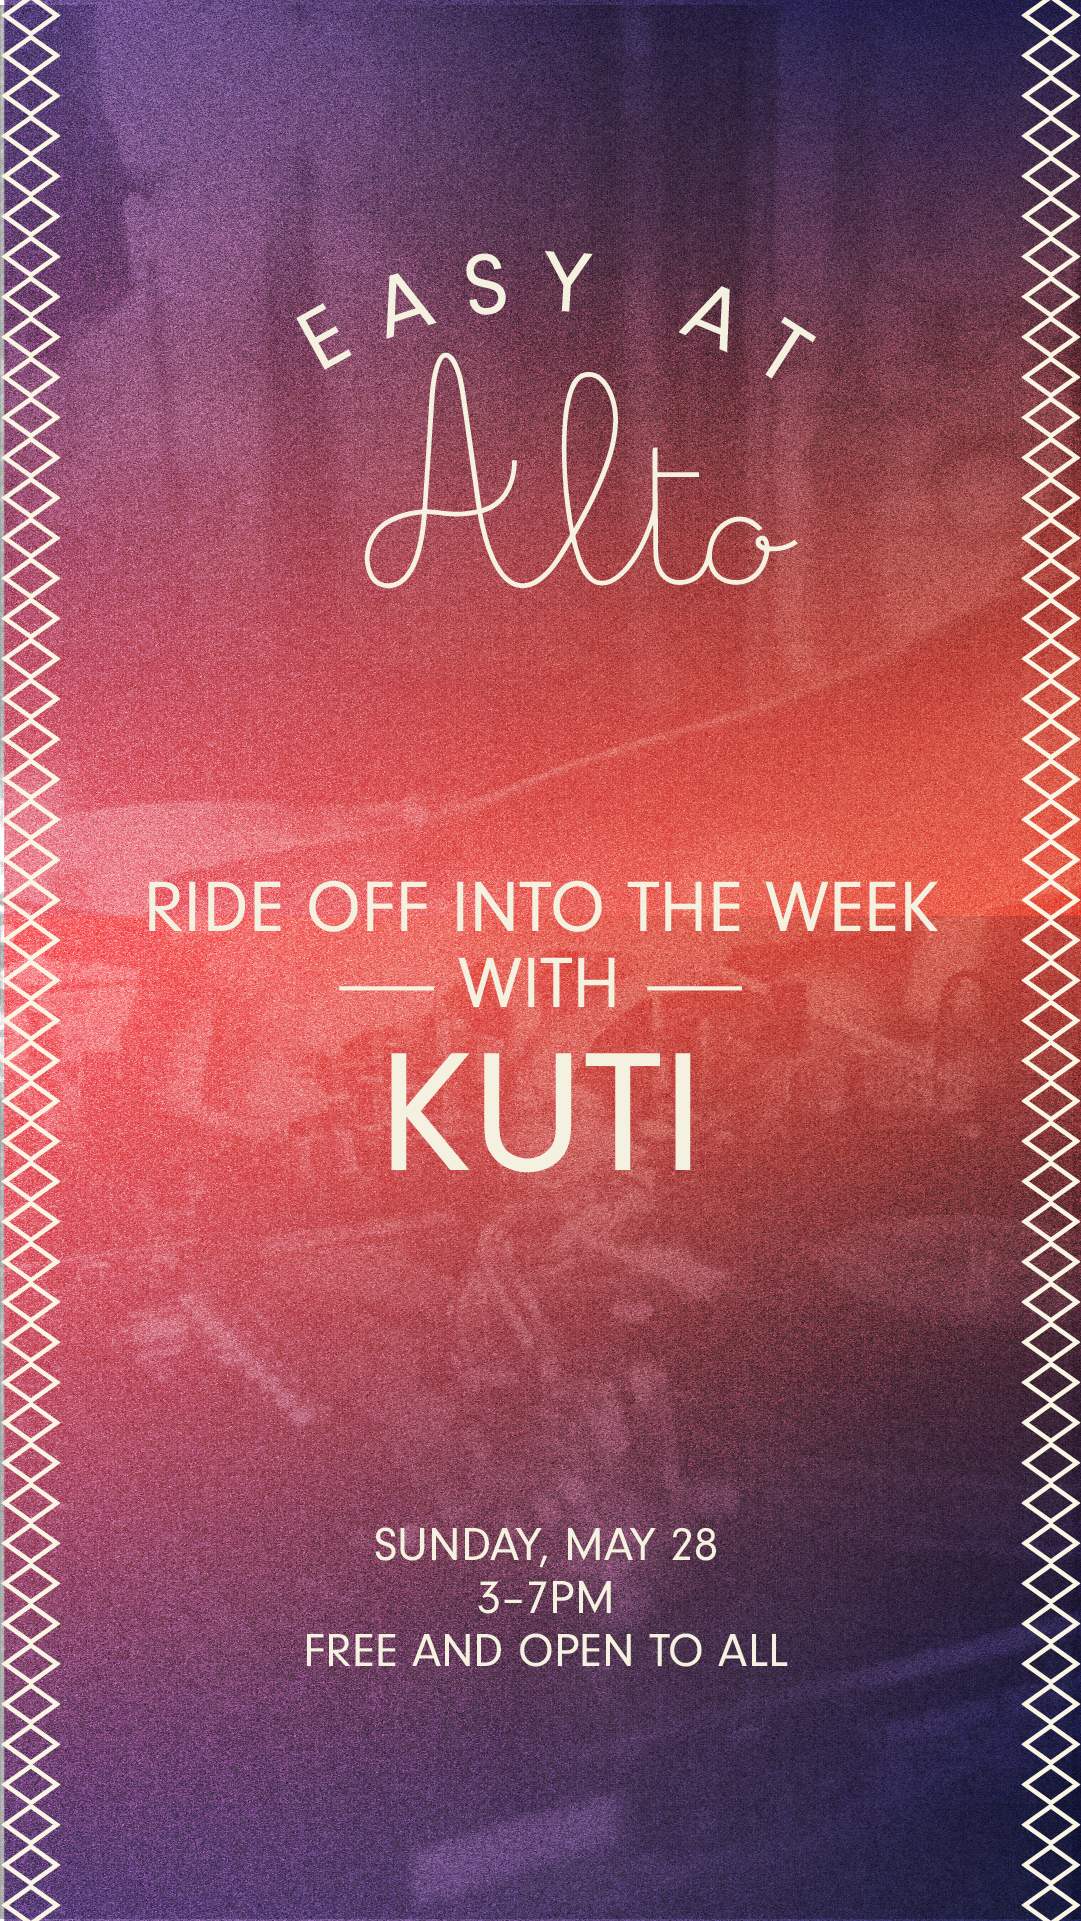 Easy At Alto with Kuti